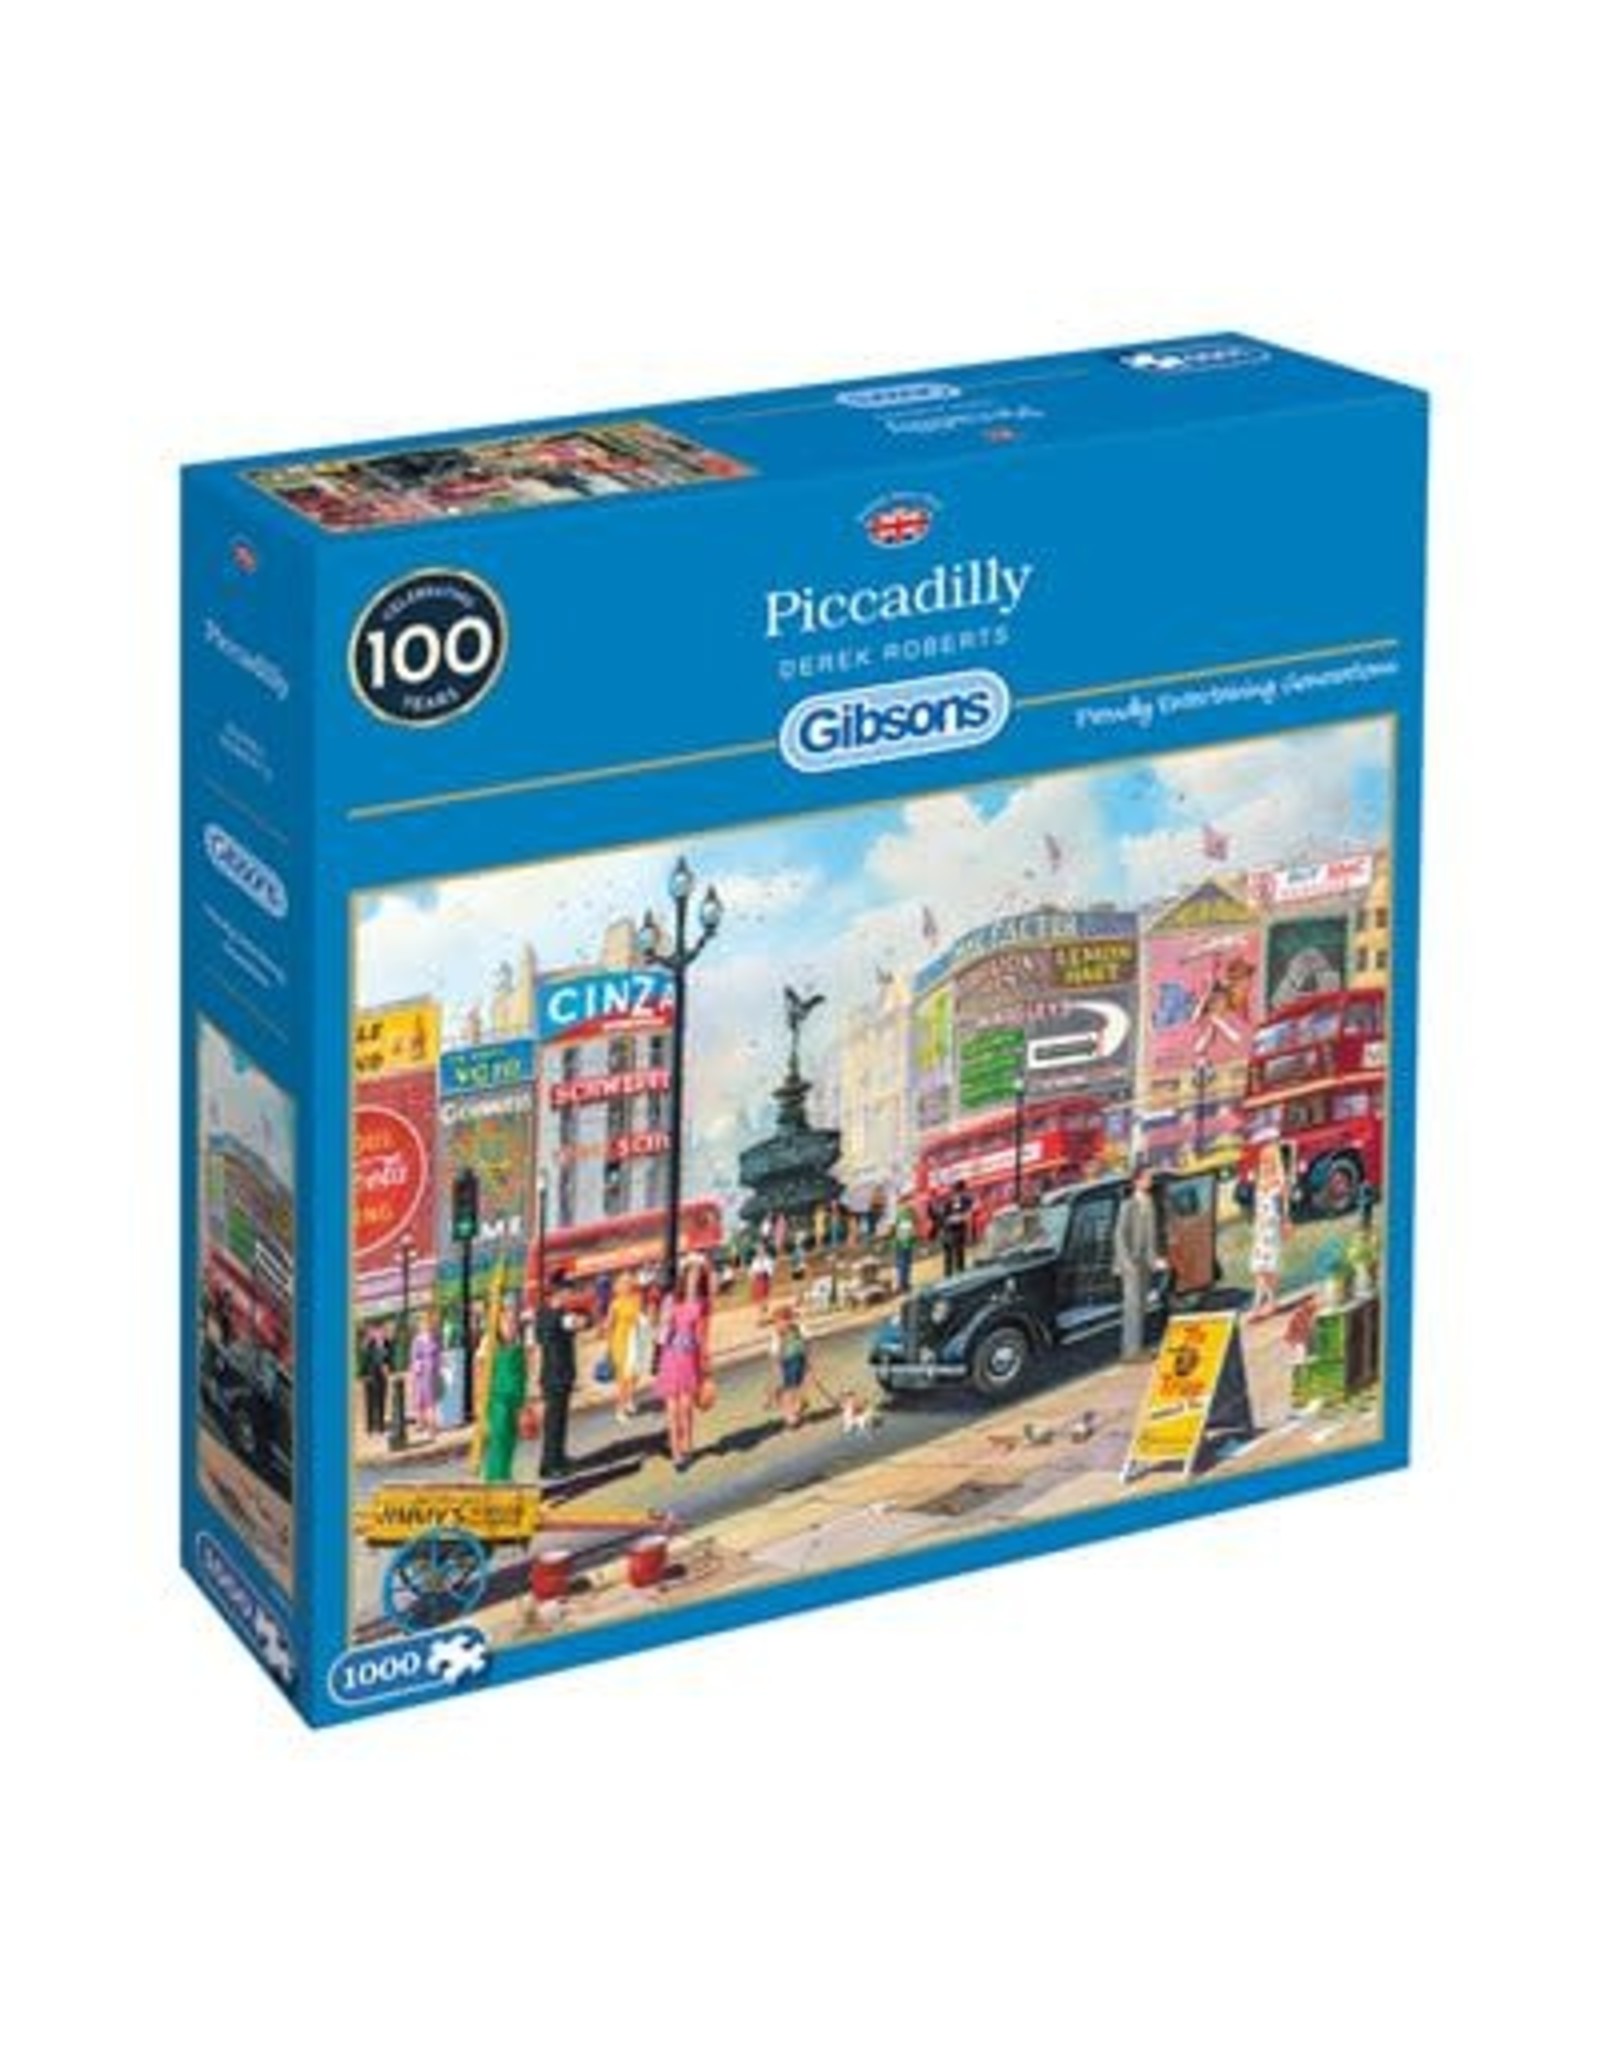 Gibsons Piccadilly 1000pc